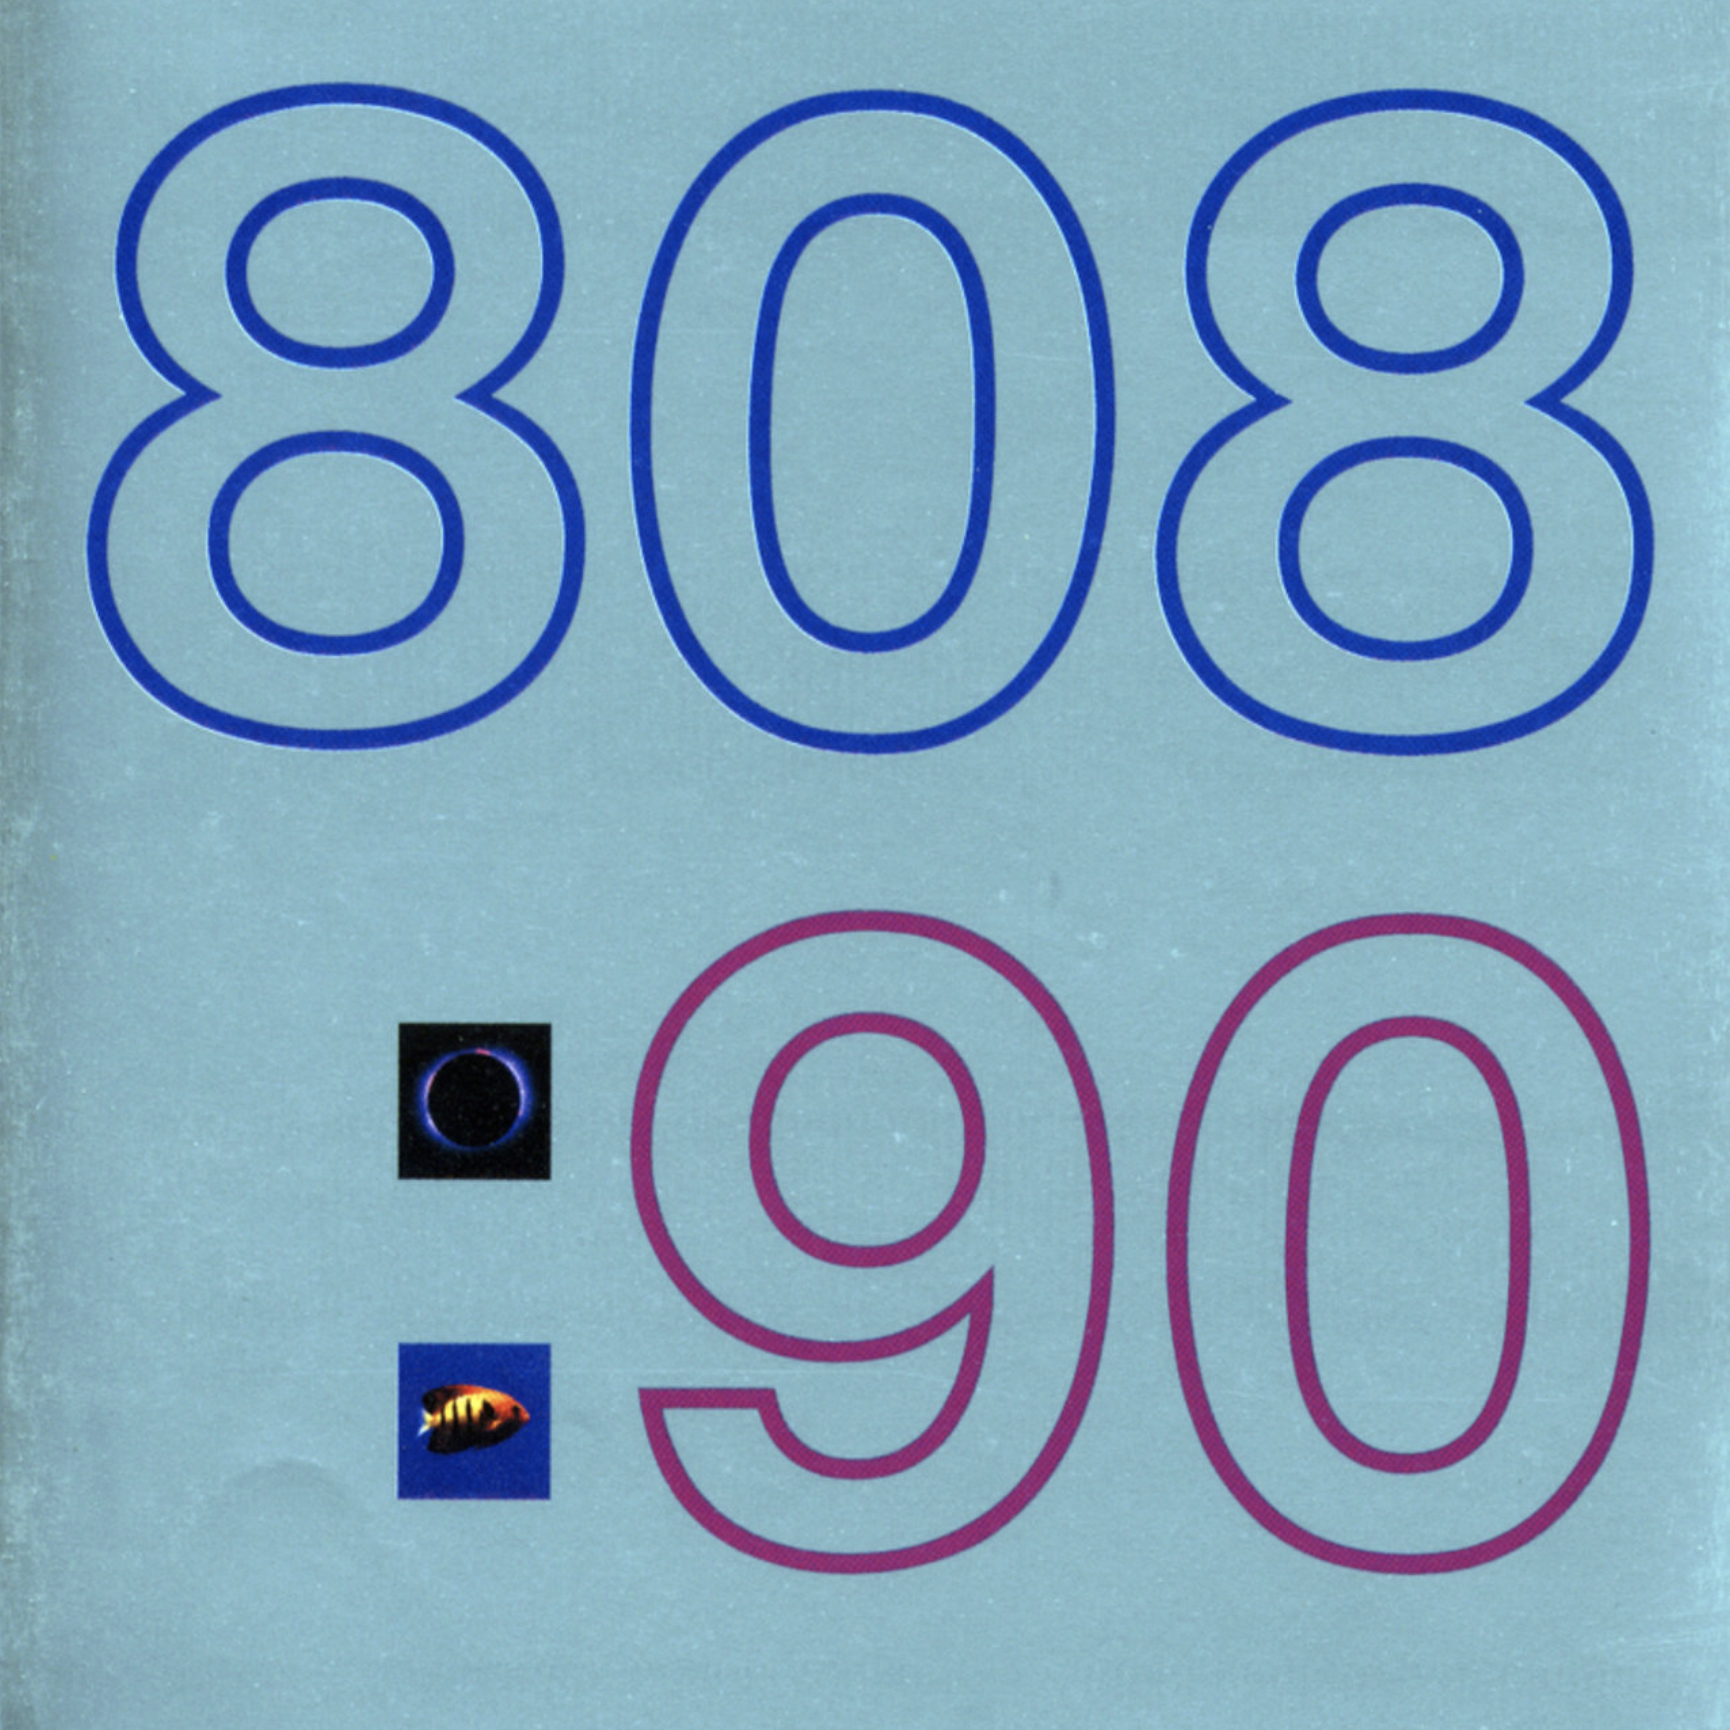 90 – 808 State (1989)